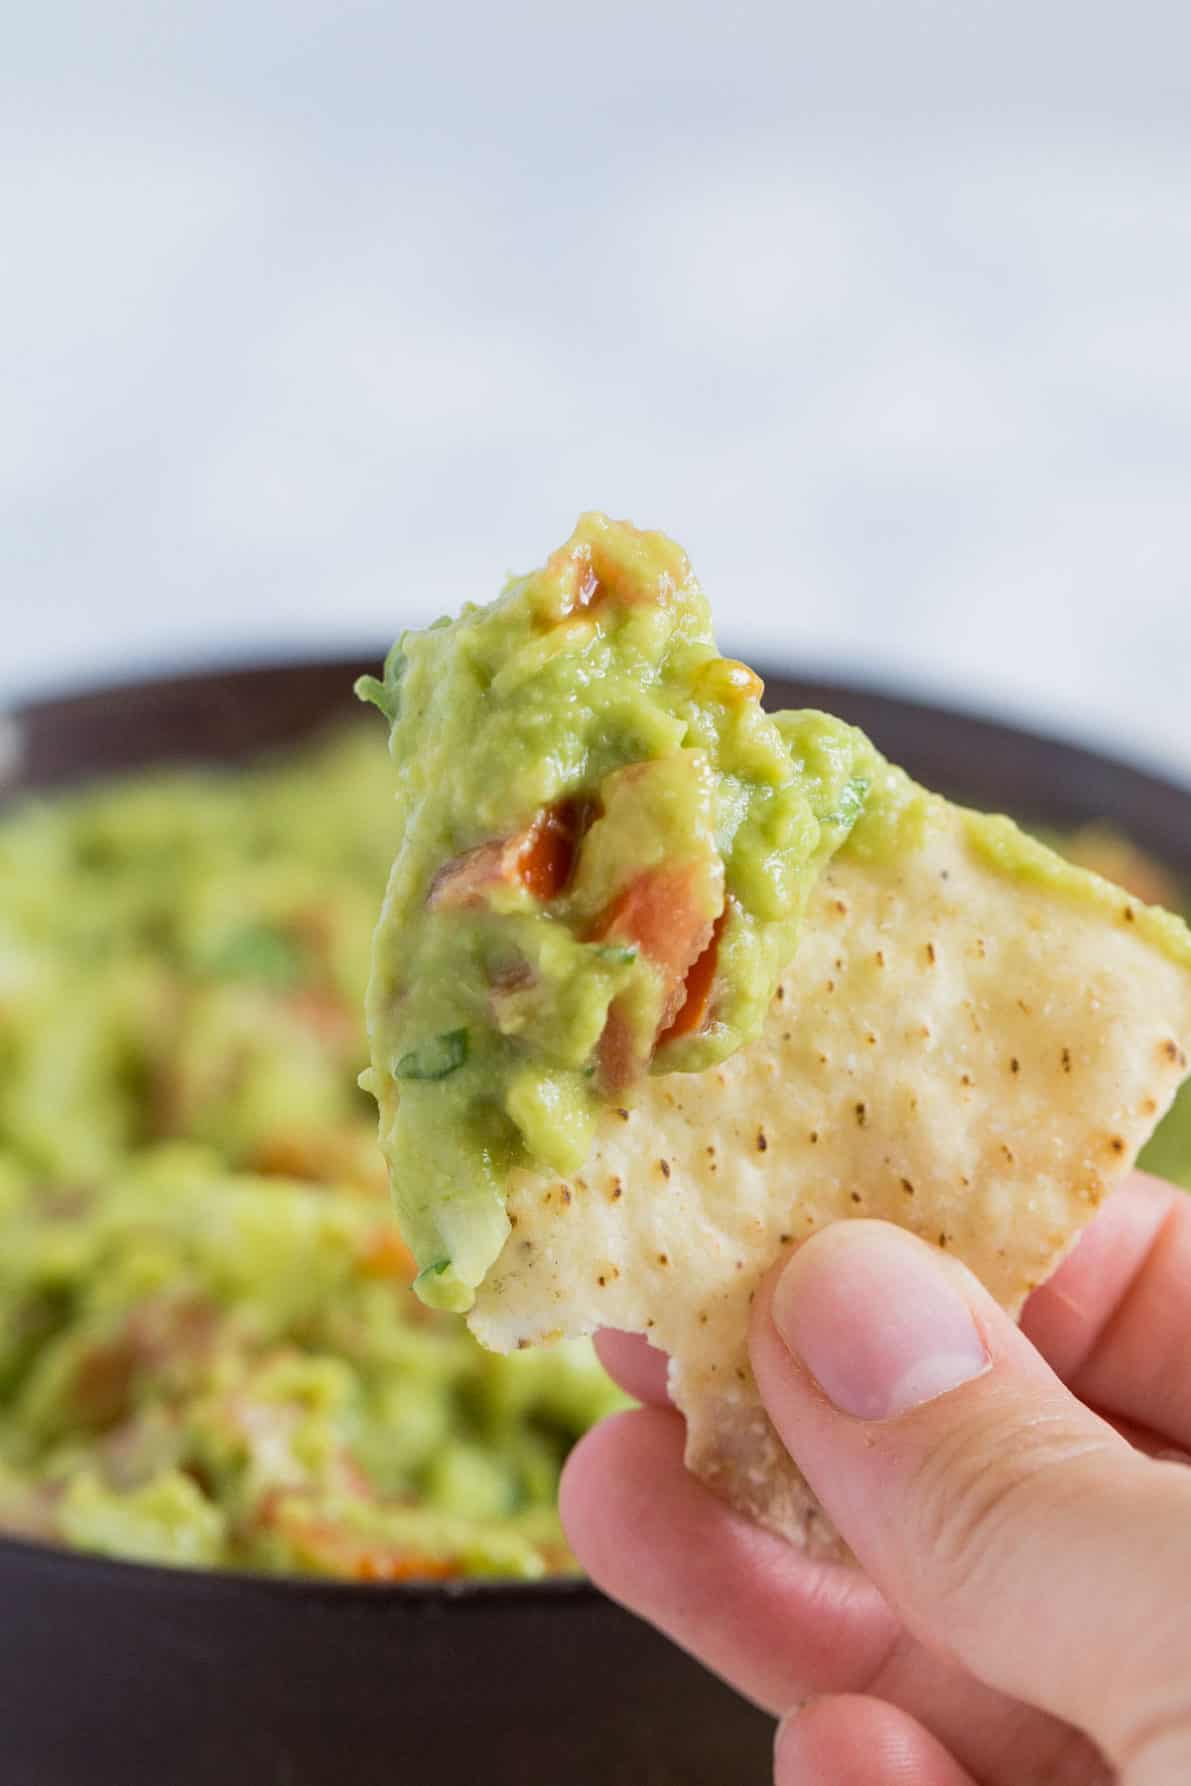 A chip dipped into authentic guacamole.